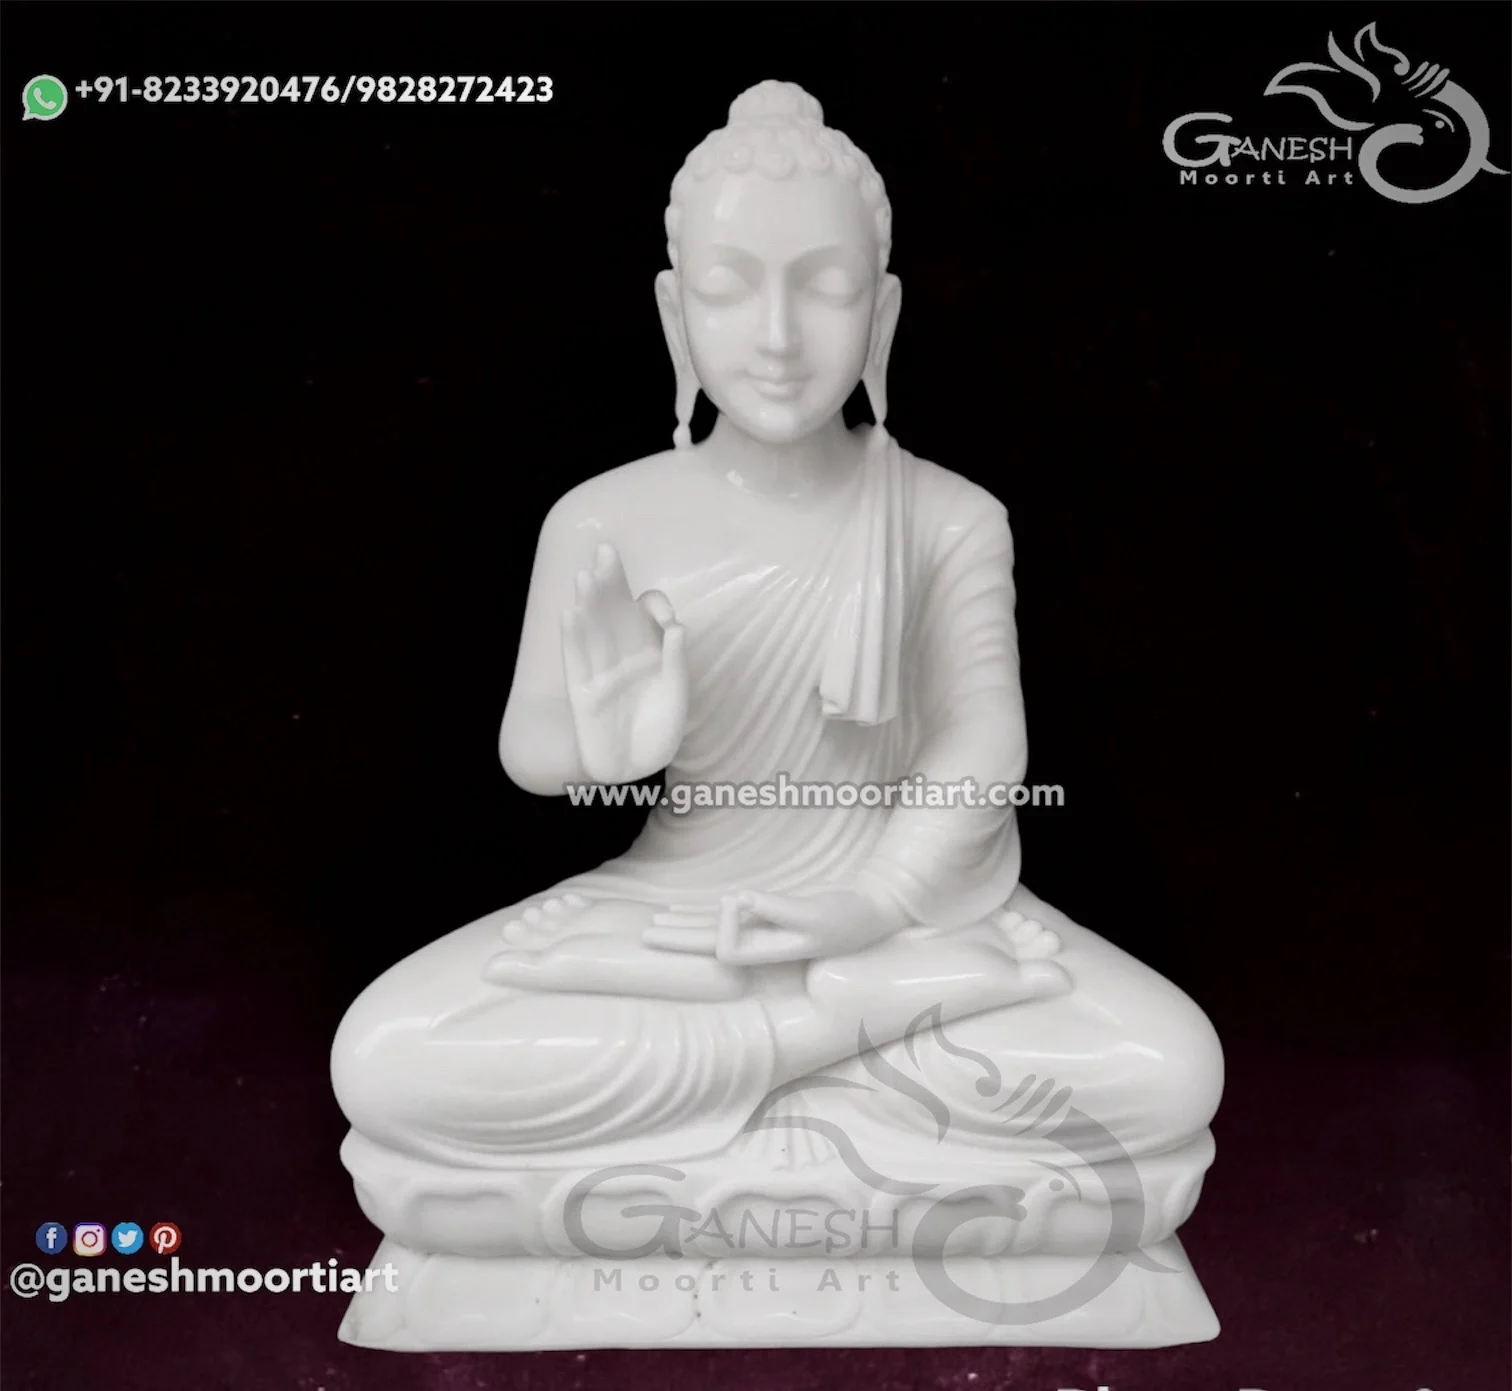 Buy Blessing Buddha Statue for Home